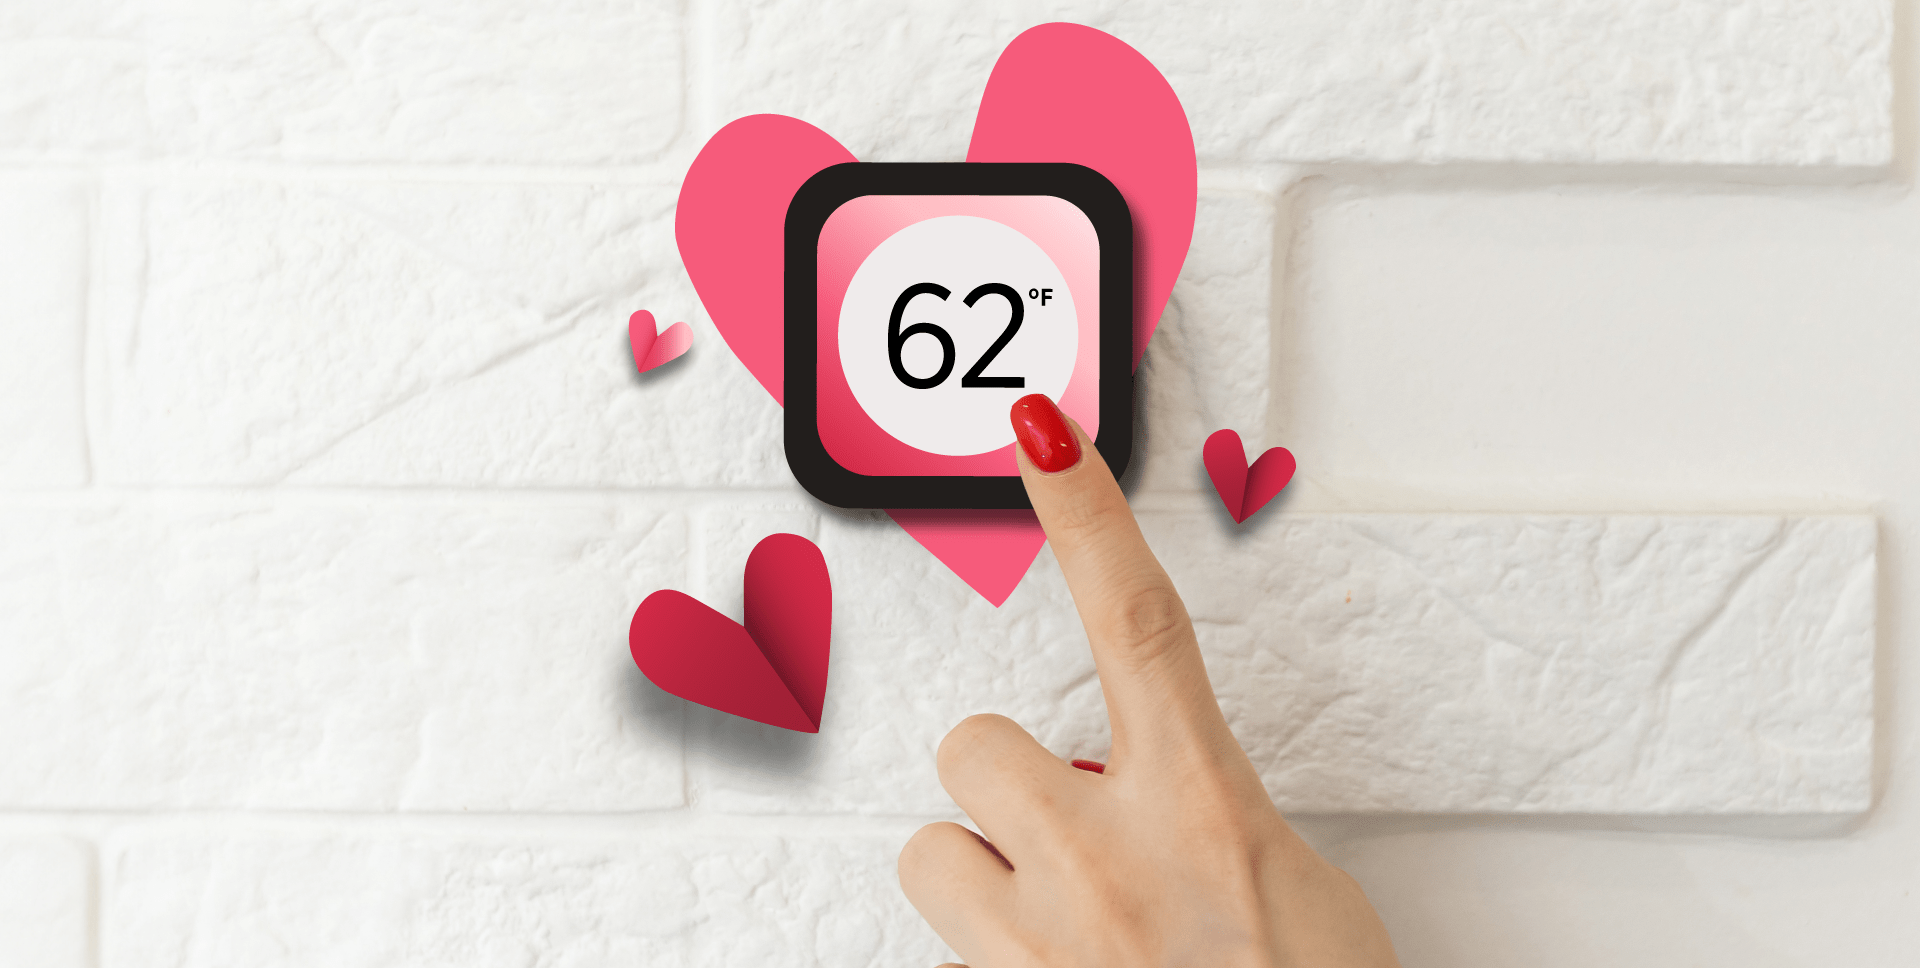 A hand adjusting a smart thermostat set at 62 degrees, with pink and red hearts in the background.